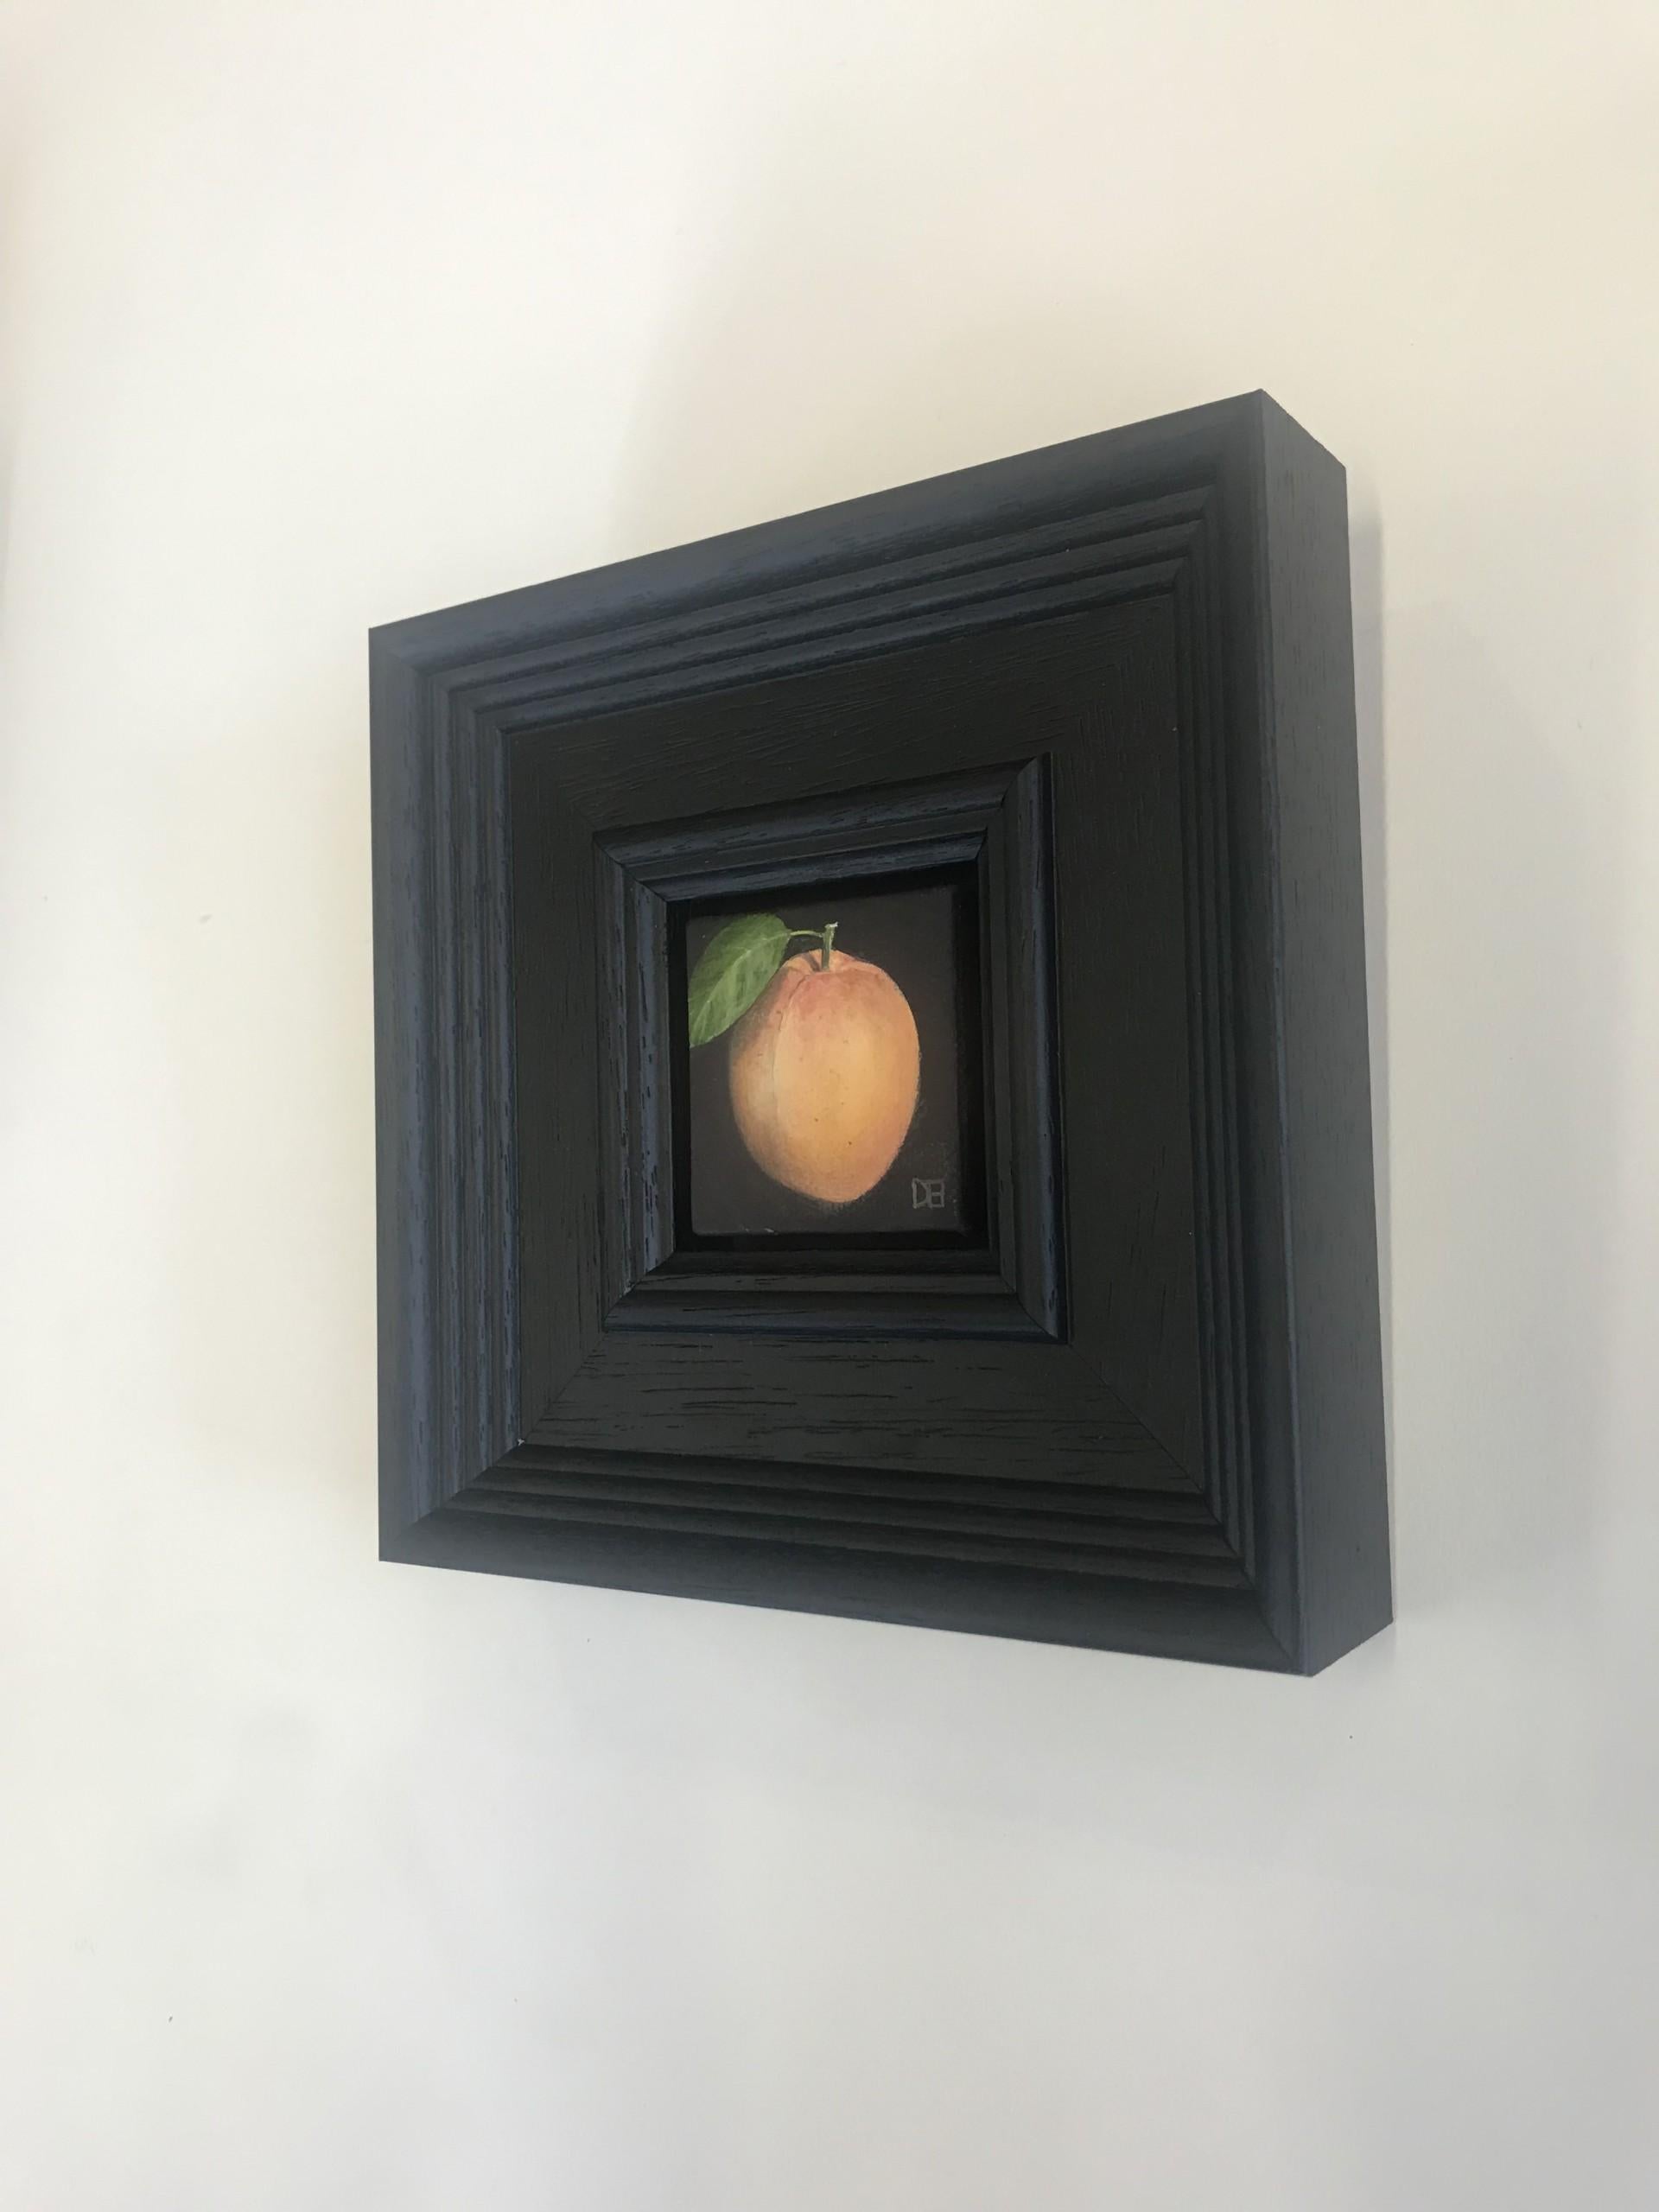 Pocket Apricot by Dani Humberstone [2022]
original

Oil on Canvas

Image size: H:5 cm x W:5 cm

Complete Size of Unframed Work: H:5 cm x W:5 cm x D:3.5cm

Frame Size: H:16 cm x W:16 cm x D:4cm

Sold Framed

Please note that insitu images are purely